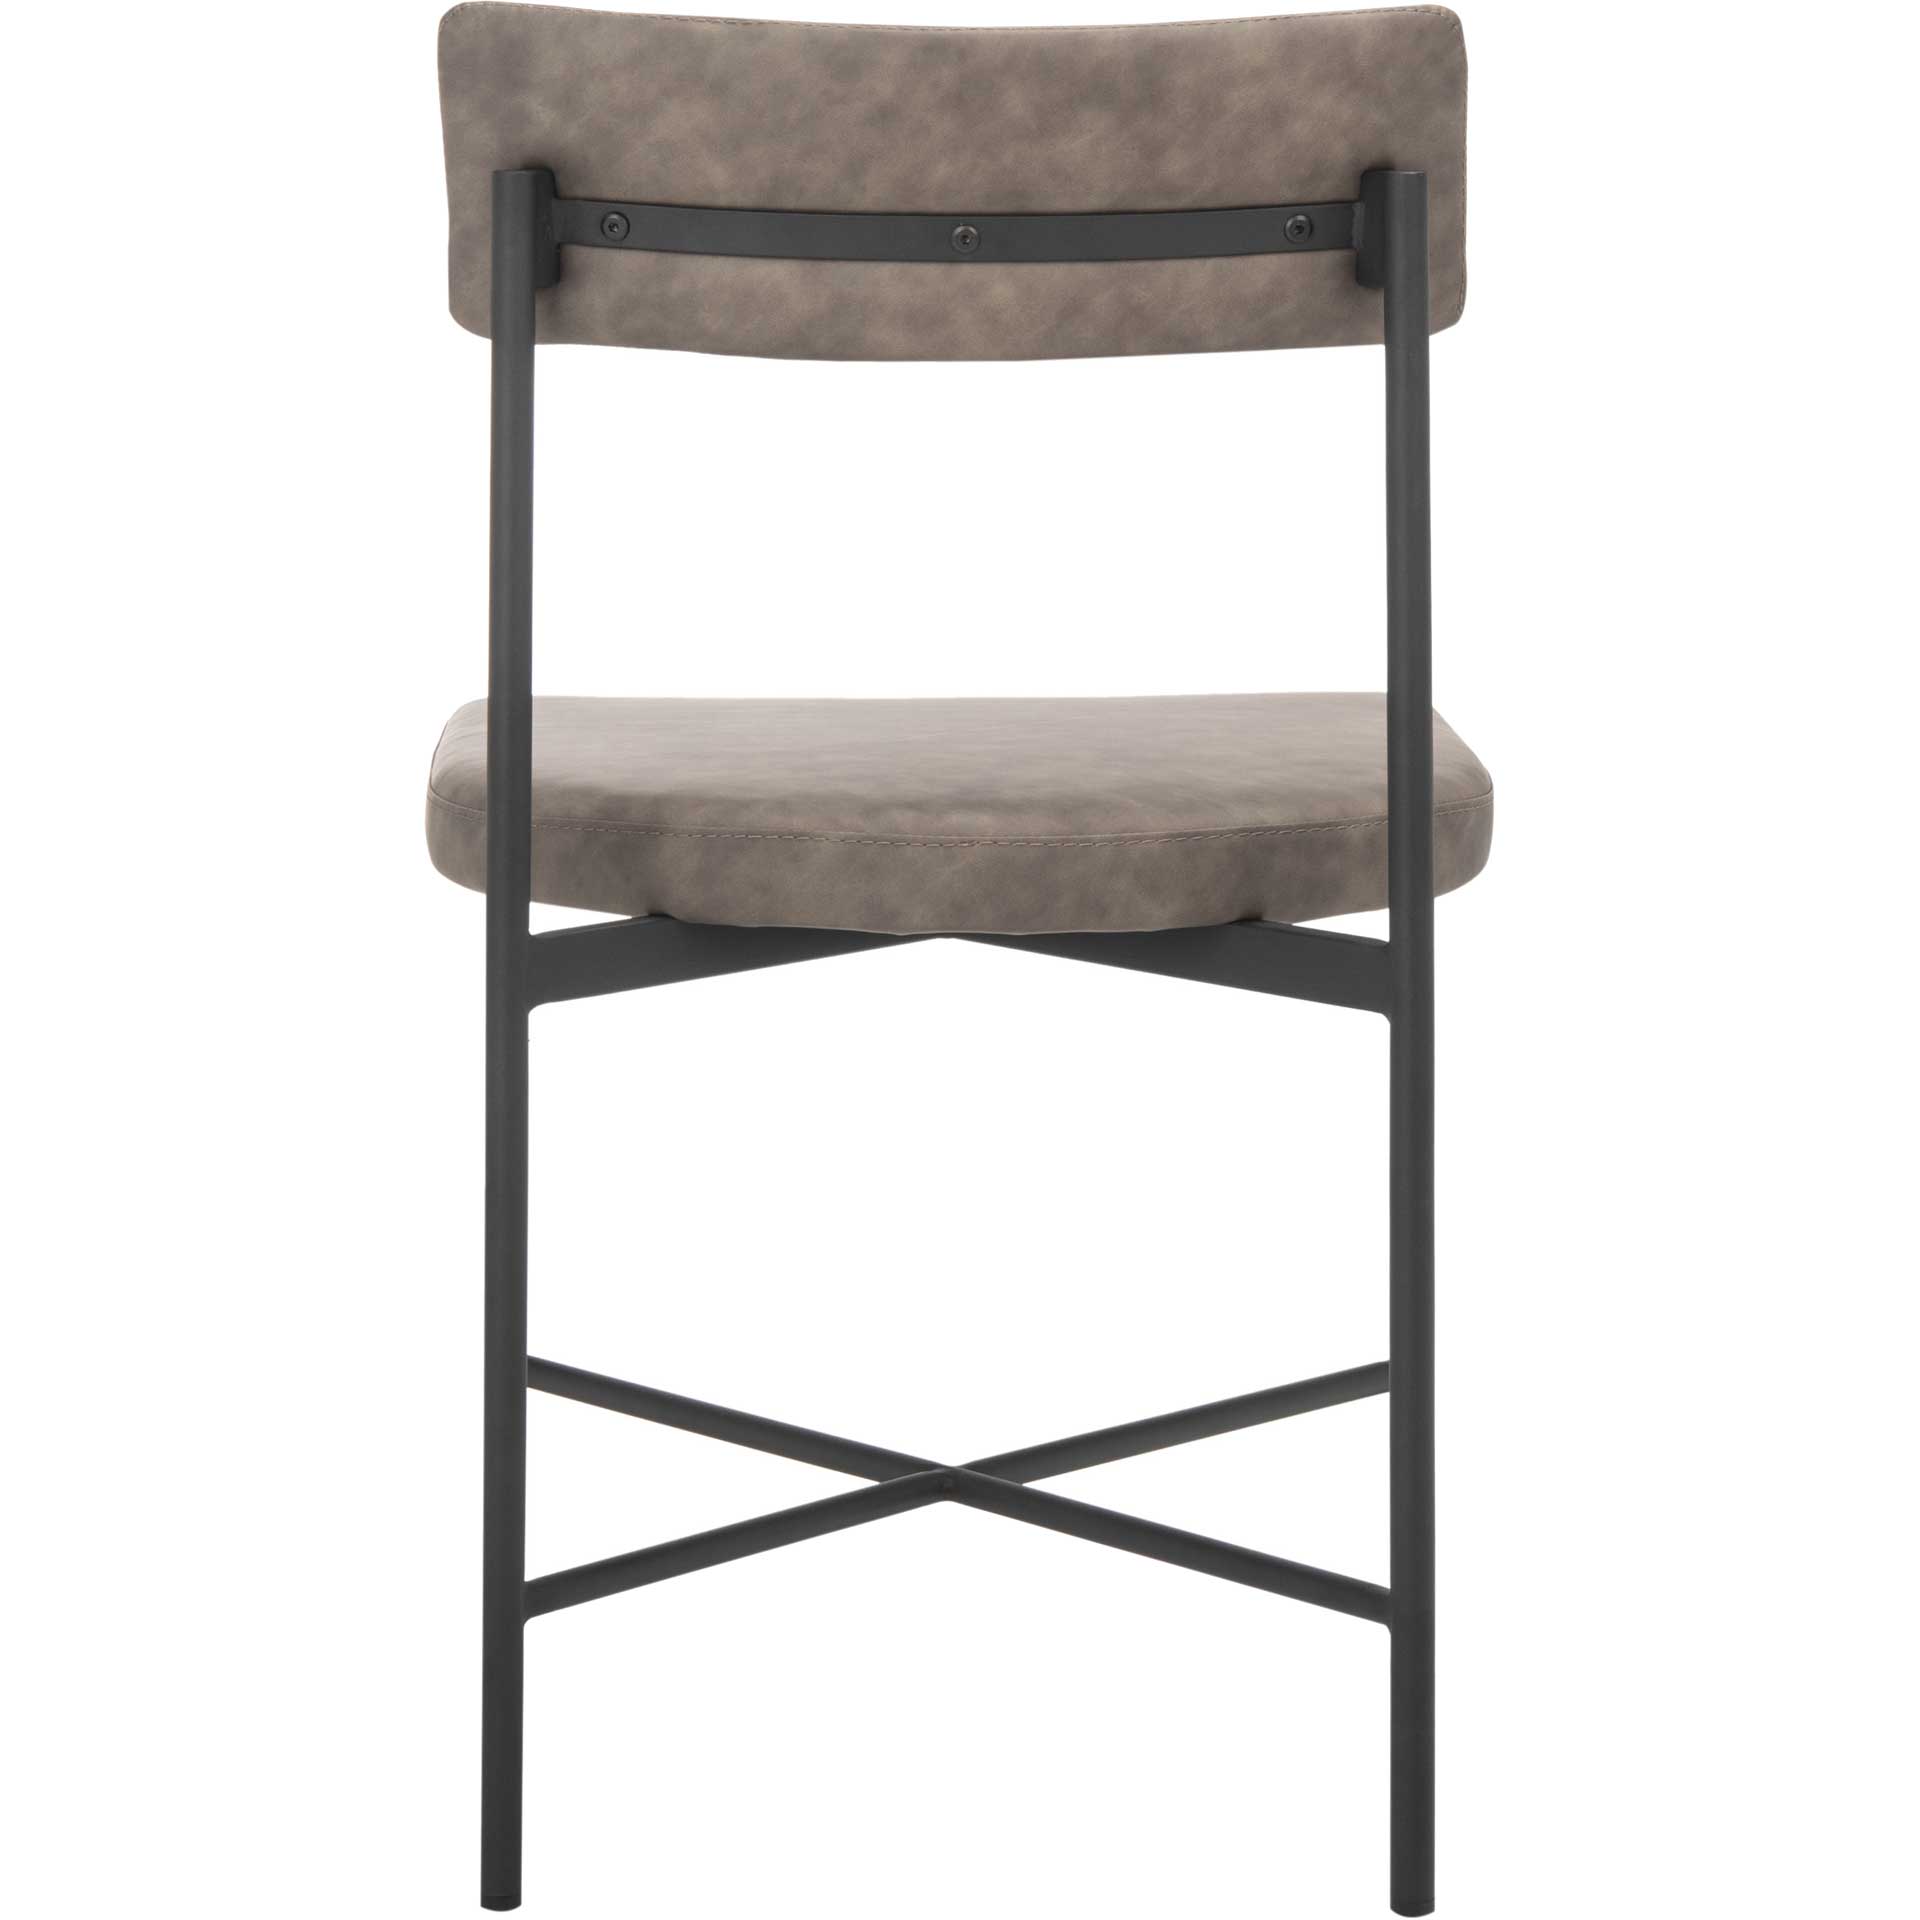 Arden Dining Chairs Gray/Black (Set of 2)